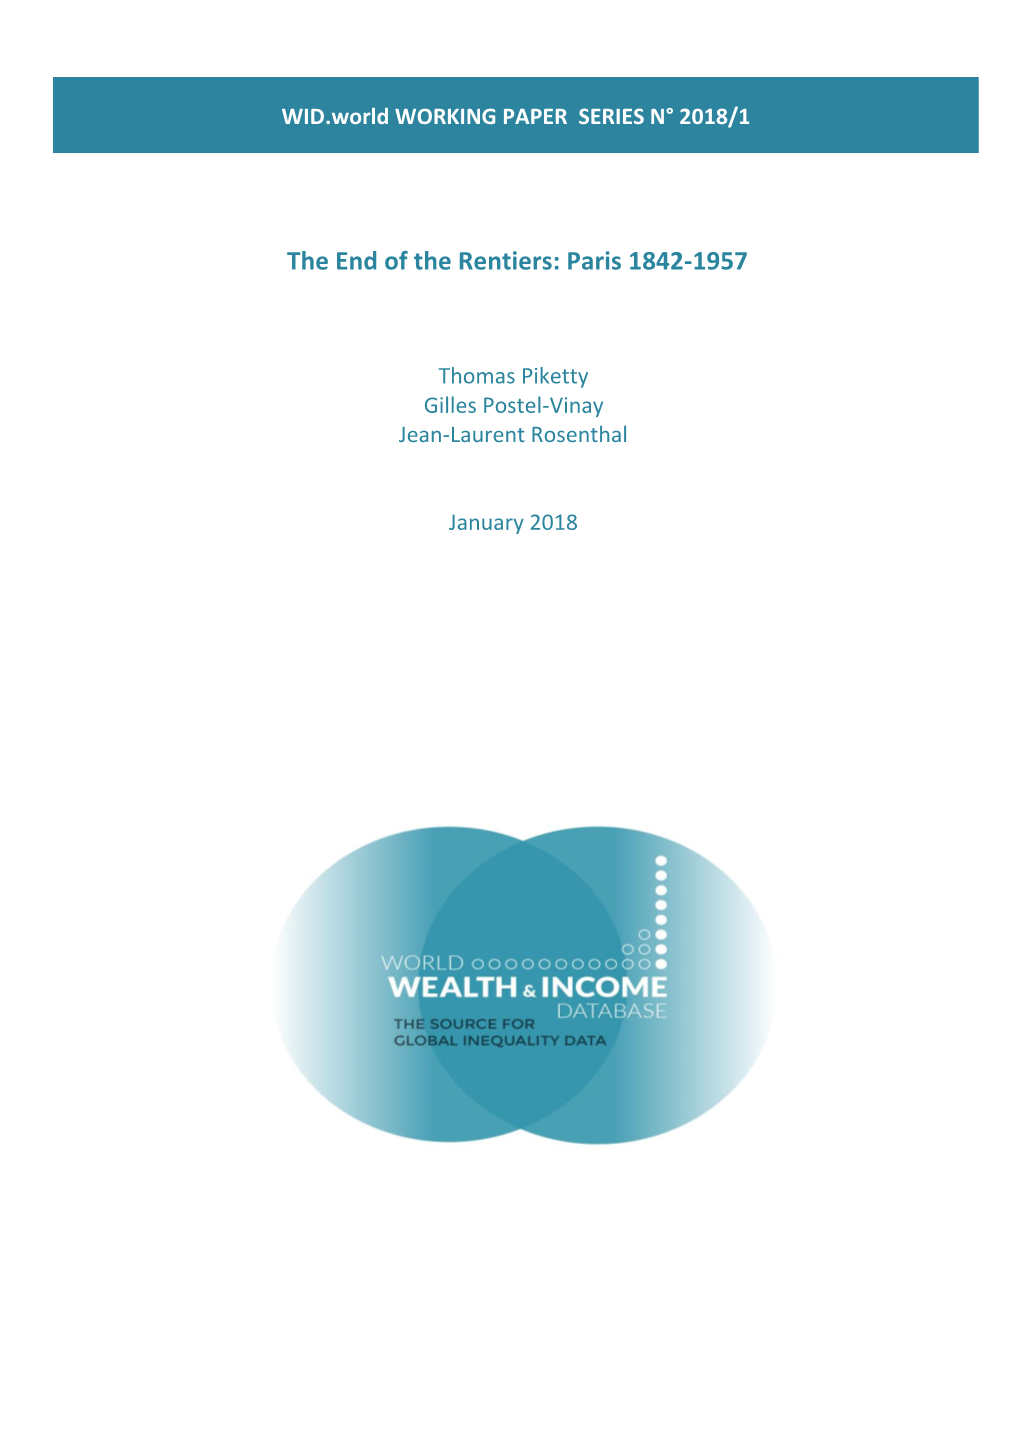 The End of the Rentiers: Paris 1842-1957